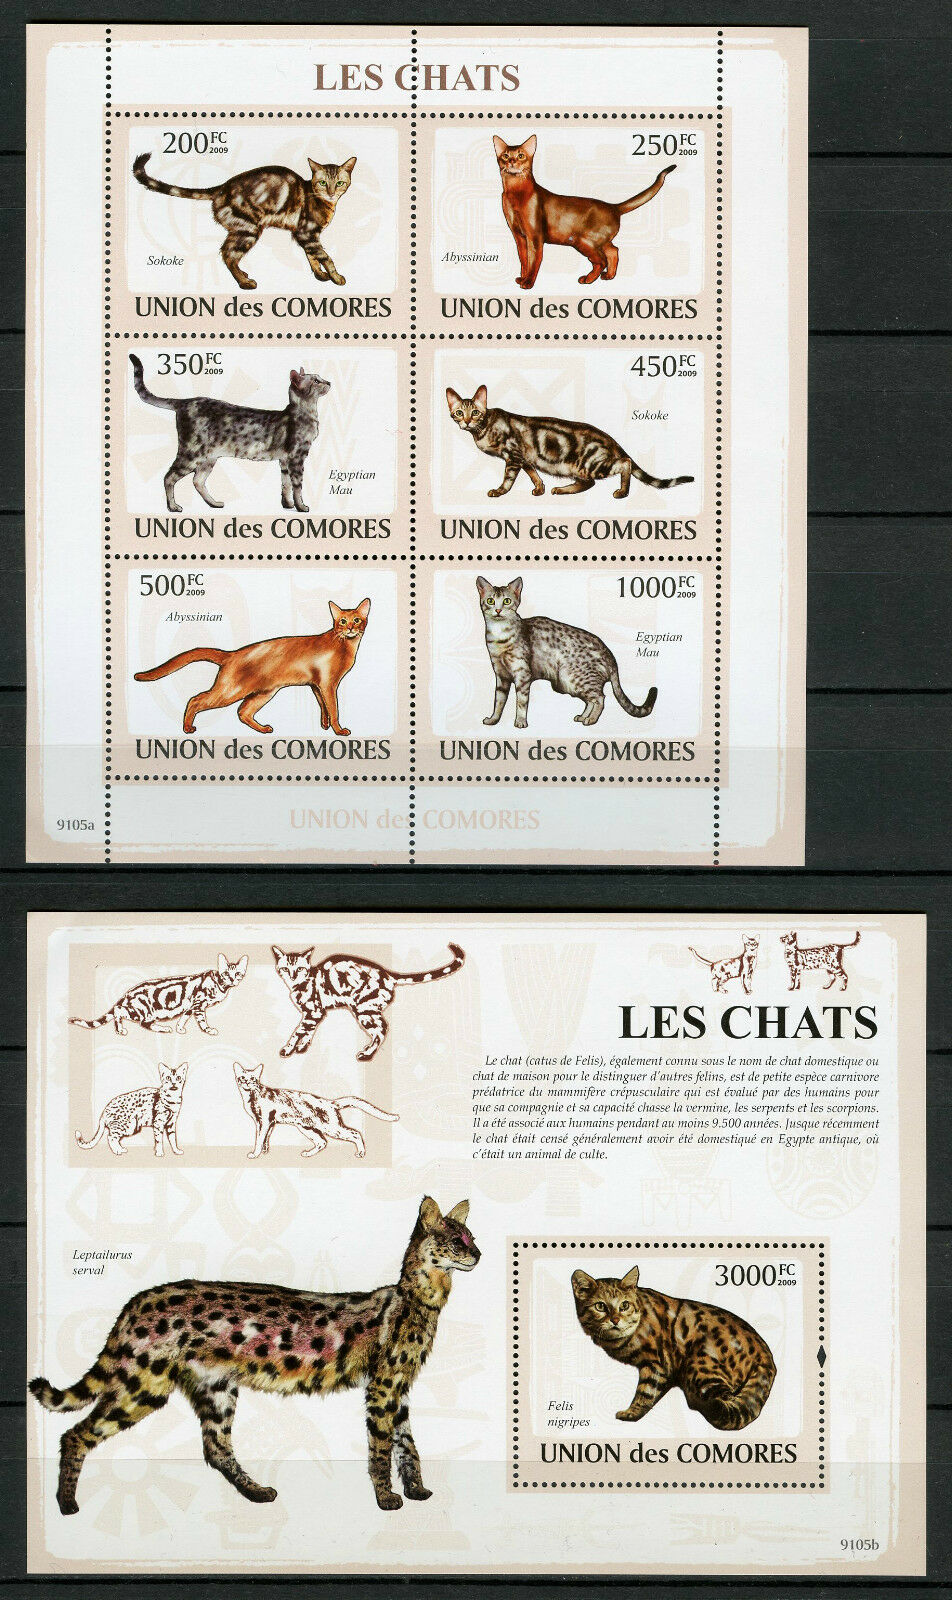 Comoros Comores 2009 MNH Cats Abyssinian Sokoke 6v M/S 1v S/S Chats Stamps